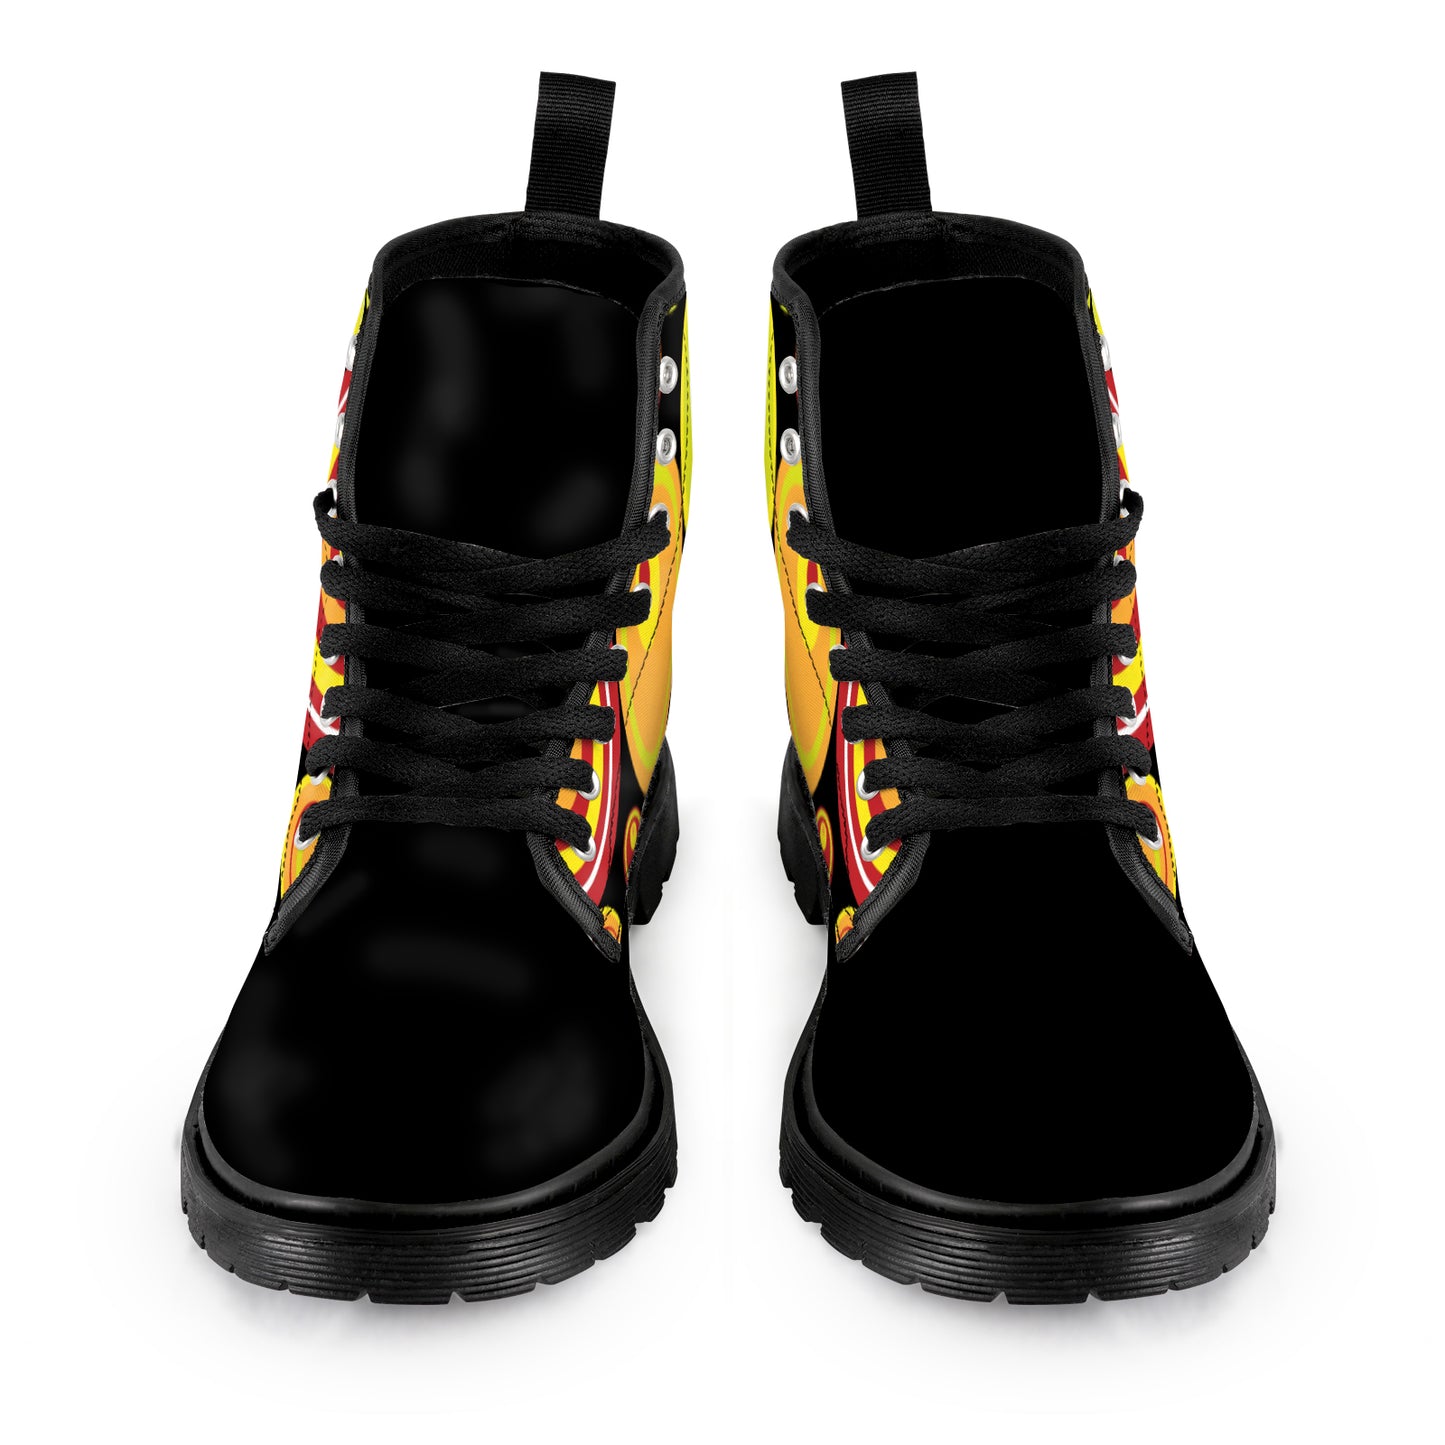 Men's Lace Up Canvas Boots - Retro (Black with Circles)